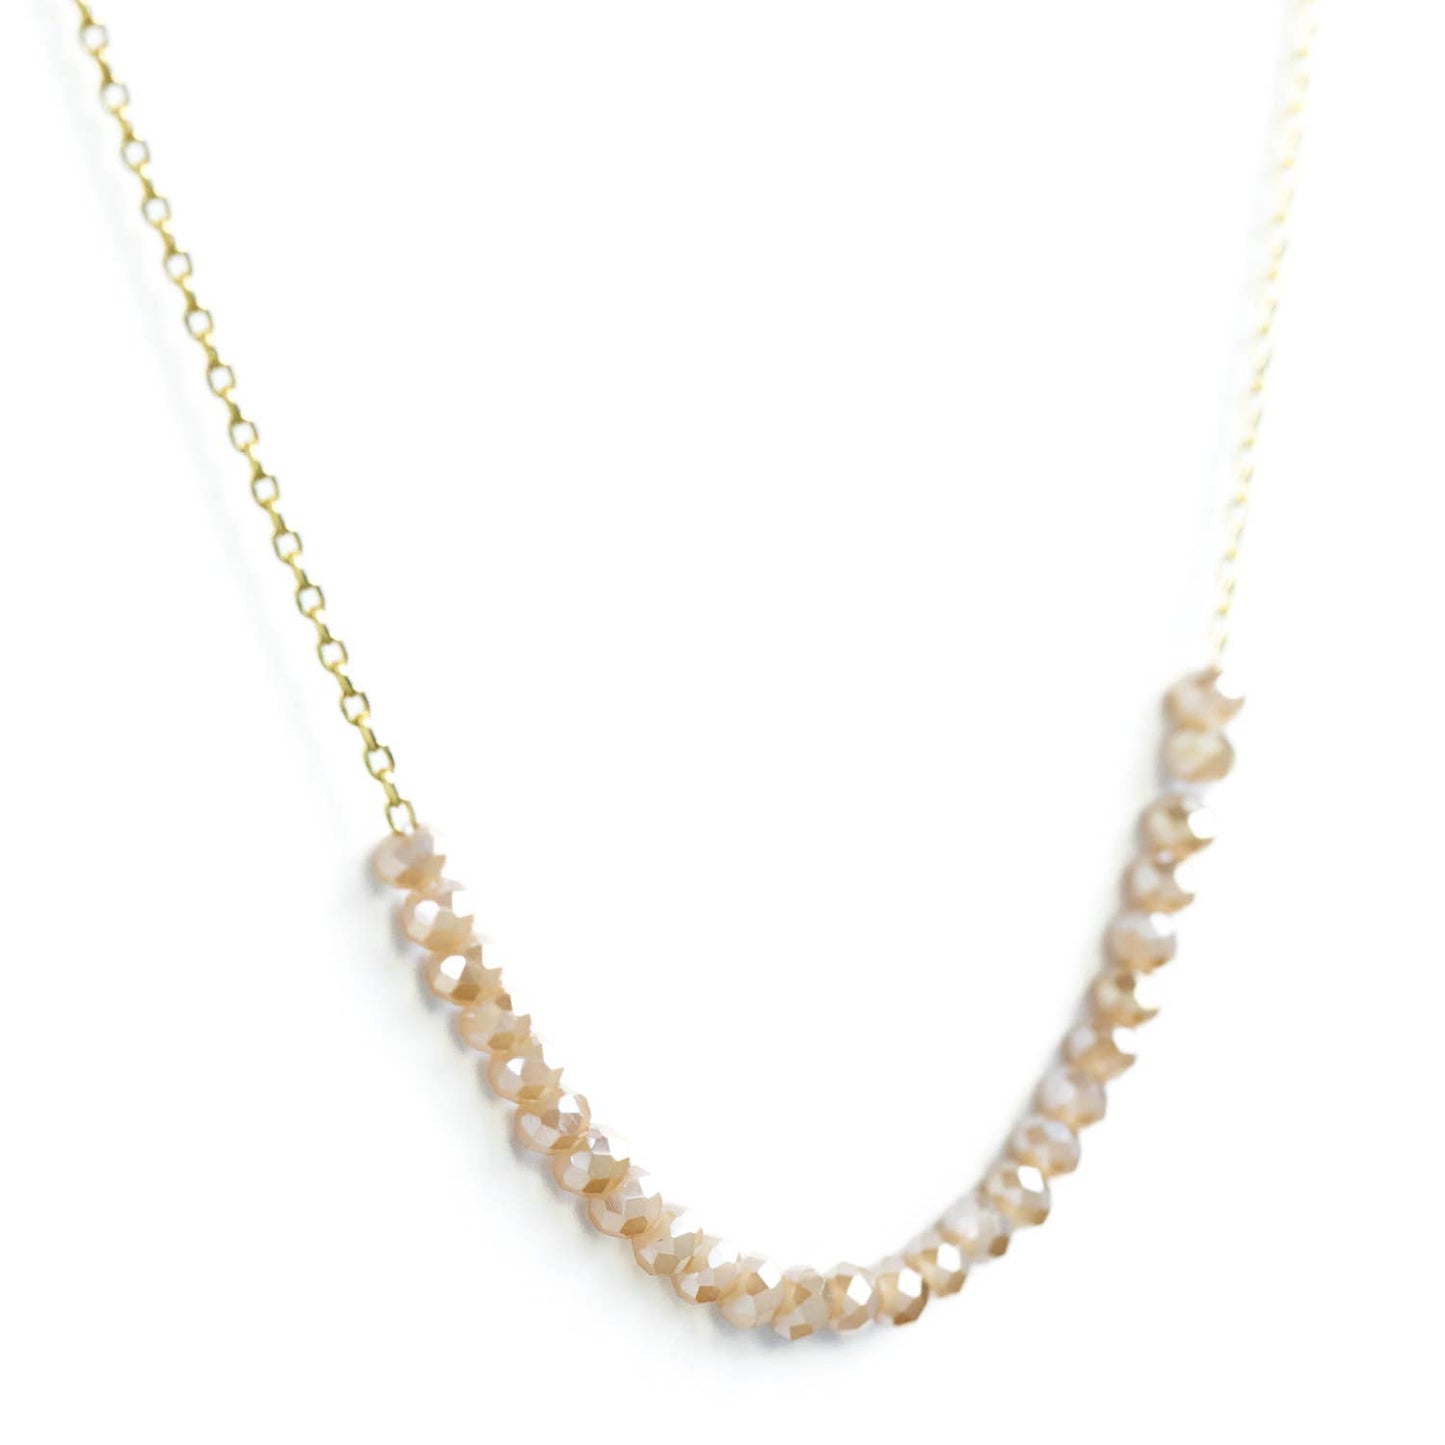 Delicate Crystal Accented Necklace